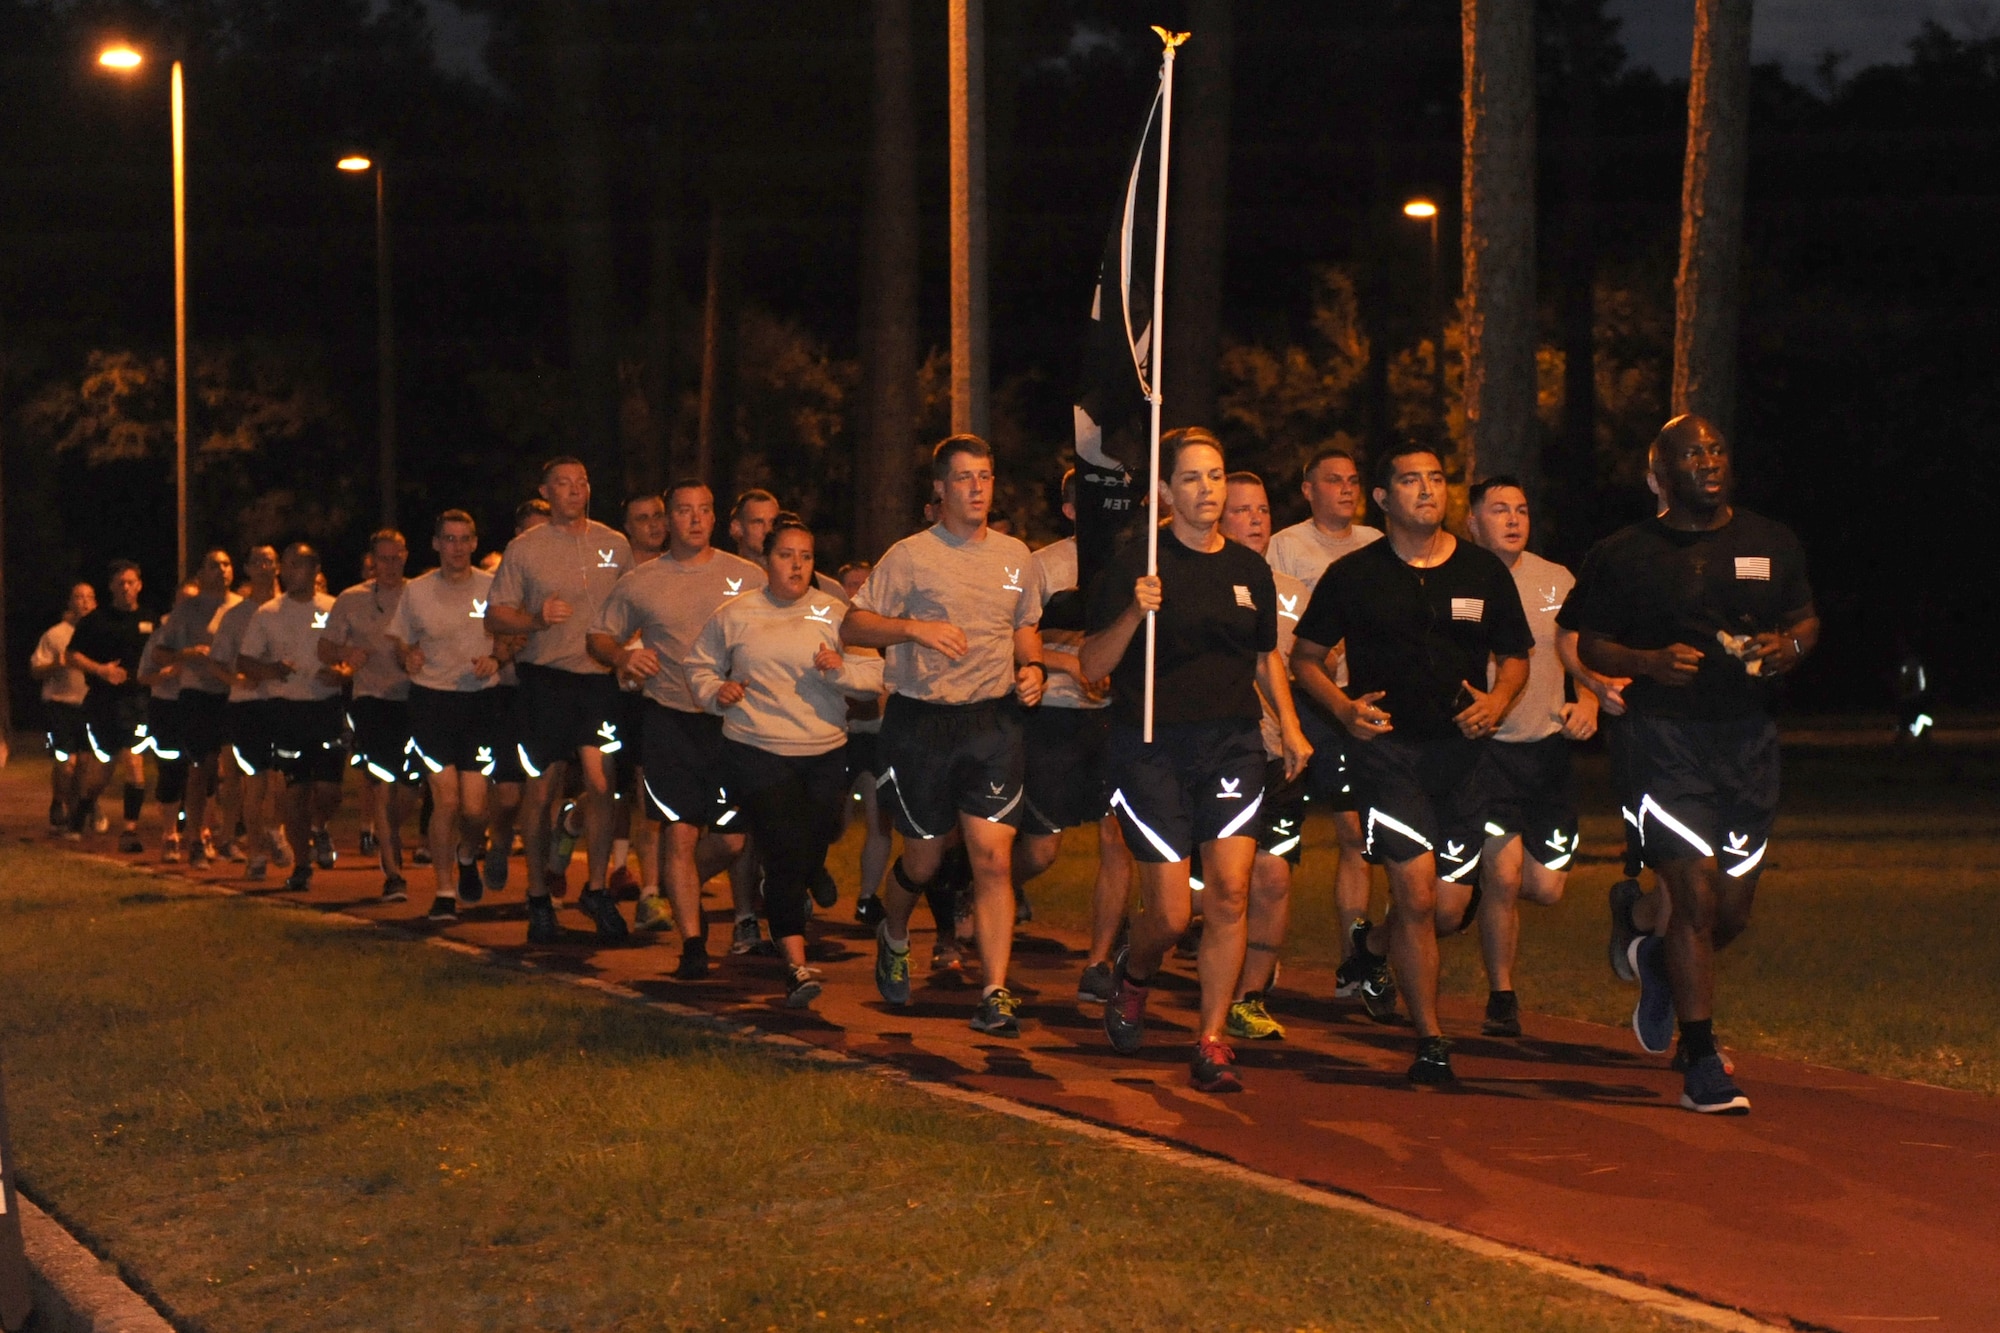 Col. Michele Edmondson, 81st Training Wing commander, and Chief Master Sgt. Vegas Clark, 81st TRW command chief, lead Keesler personnel in running the final lap during Keesler’s POW/MIA 24-hour memorial run and vigil at the Crotwell Track Sept. 16, 2016, on Keesler Air Force Base, Miss. More than 400 Keesler personnel participated in the event, to include runners and readers. Participants ran more than 1,500 miles and raised $1,400, which will be donated to a POW/MIA memorial fund. (U.S. Air Force photo by Kemberly Groue/Released)